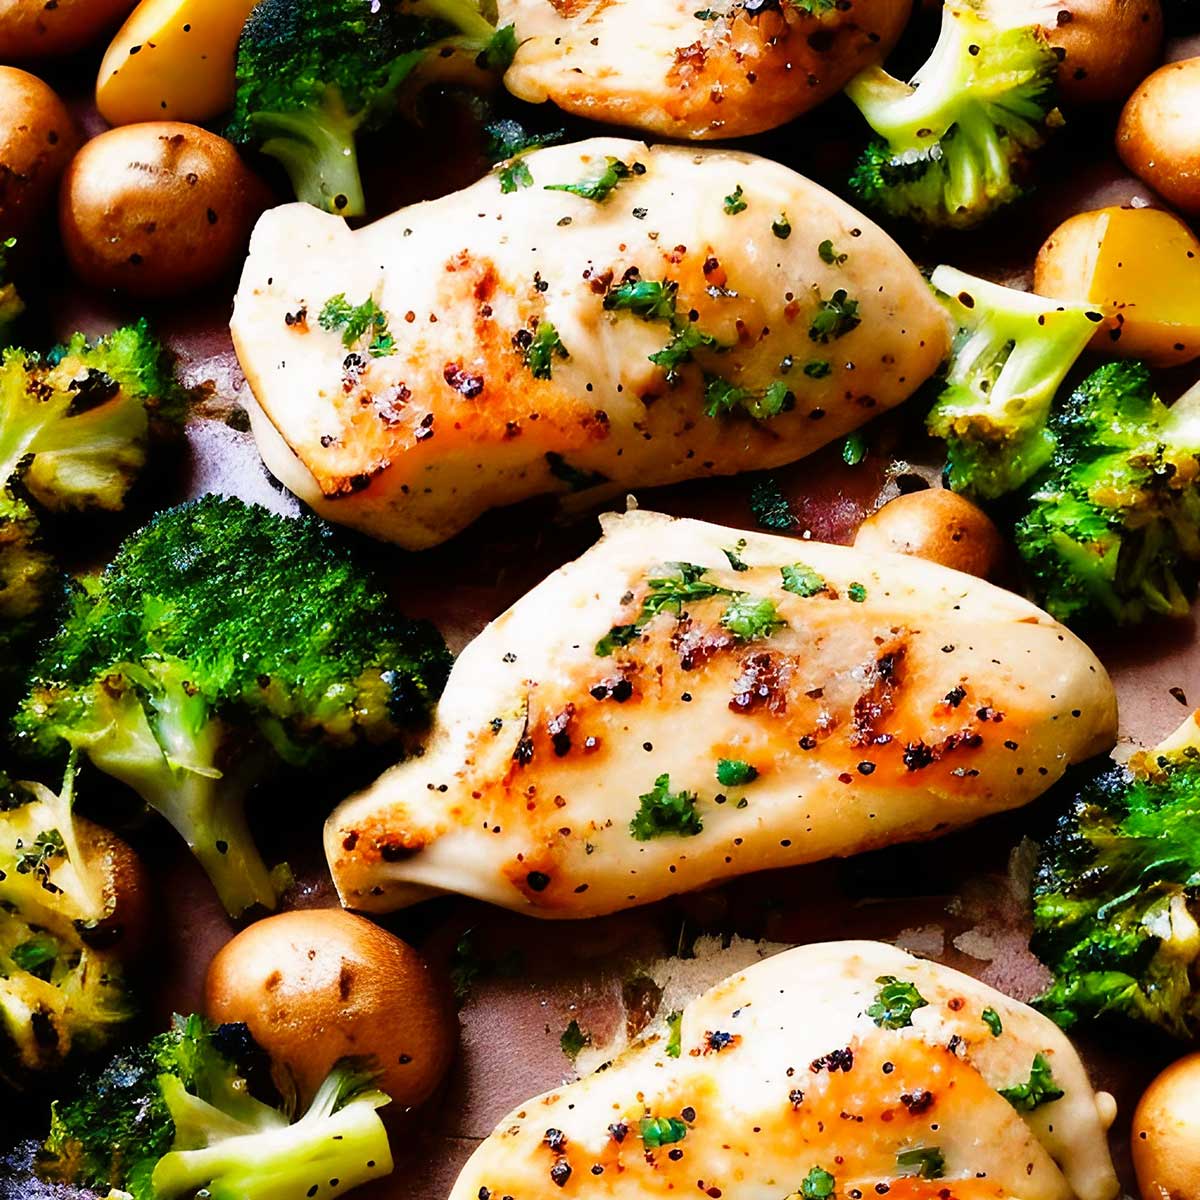 Sheet pan dinner of chicken breasts, broccoli, and potatoes.